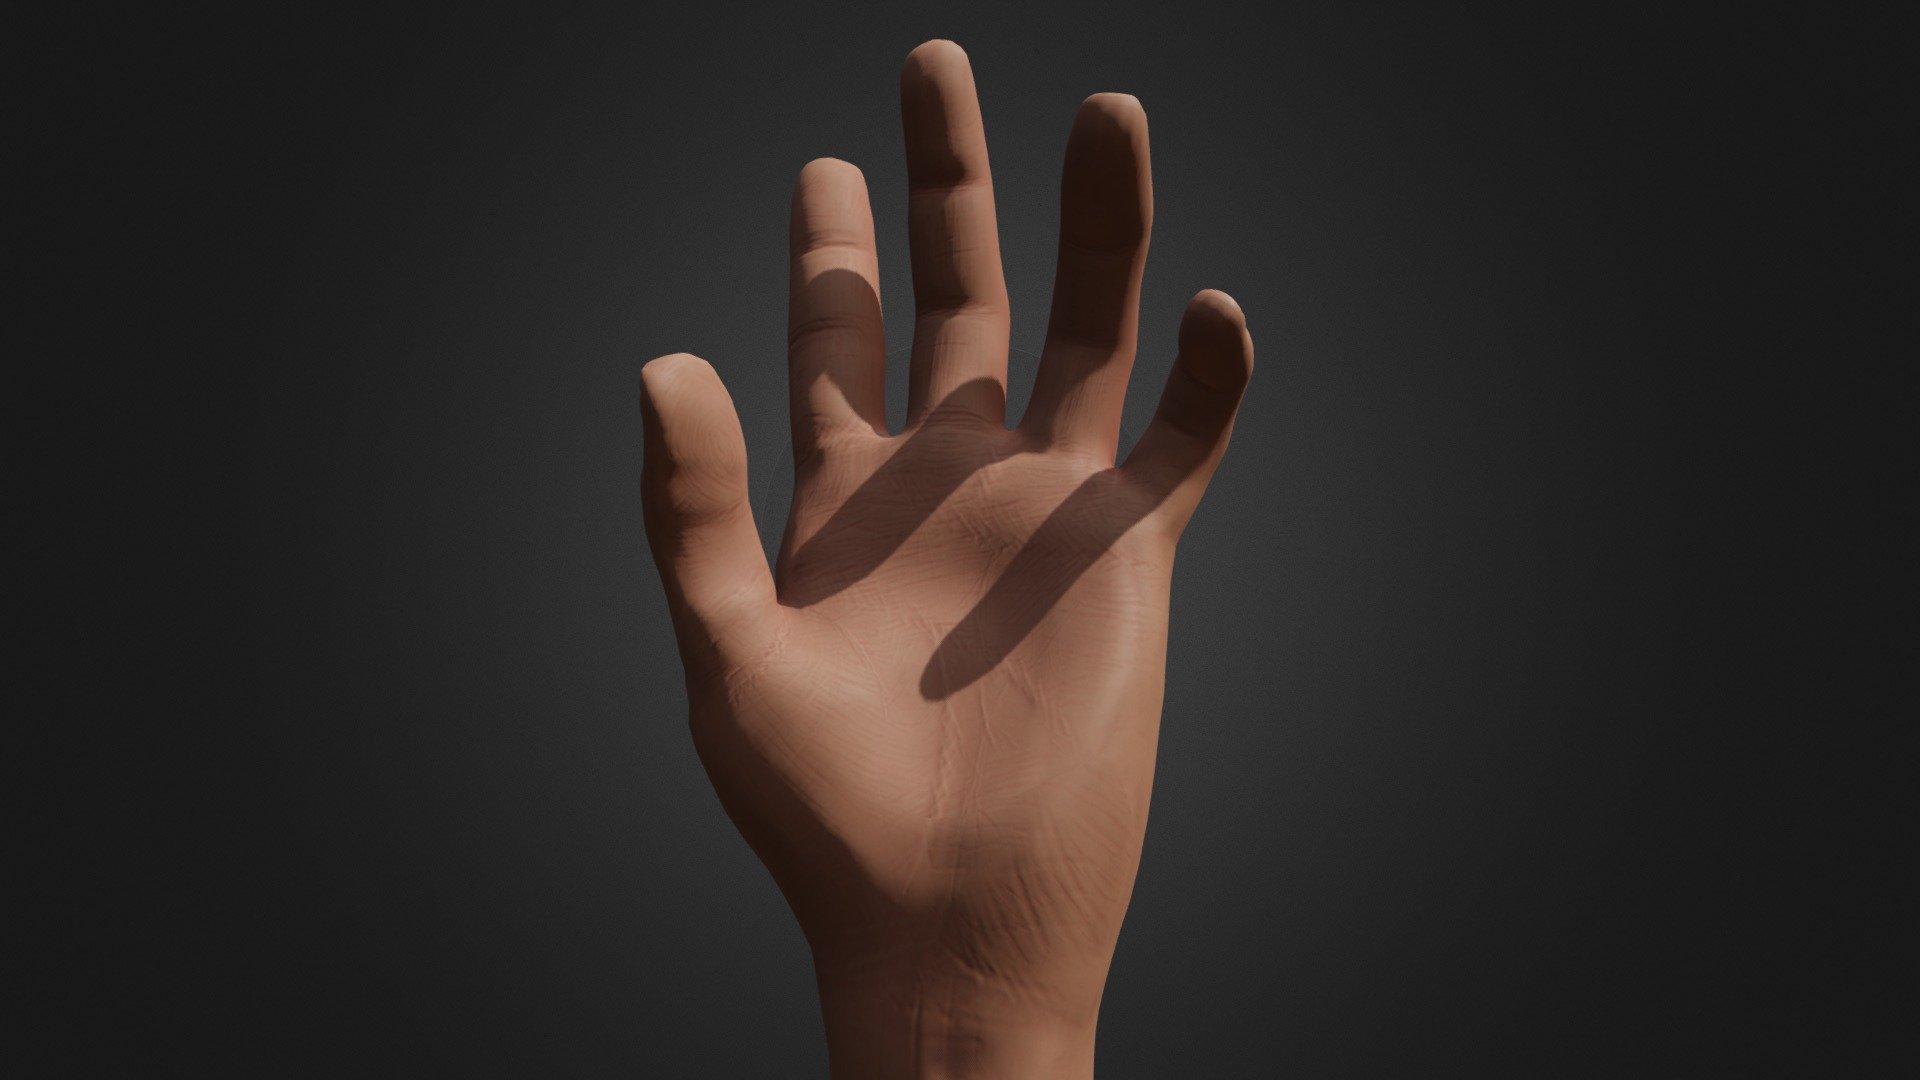 This hyper detailed rigged hand is made for CGI purposes mainly but also usable for high-end games. The model follows real hand reference and is entirely sculpted from scratch. The main reference was my own left hand (since i'm right handed) so by buying this model you are buying a close copy of my real hand, hope it comes in handy. The 2 million poly sculpt was baked onto this low poly hand mesh which you'll be obtaining. The FBX file includes everything needed for custom animation and custom use of this hand.

Includes:
4k textures (PBR Metalness), Hand Mesh, Hand rig, Animation - Hyper Detailed Rigged Hand - 3D model by taumich 3d model